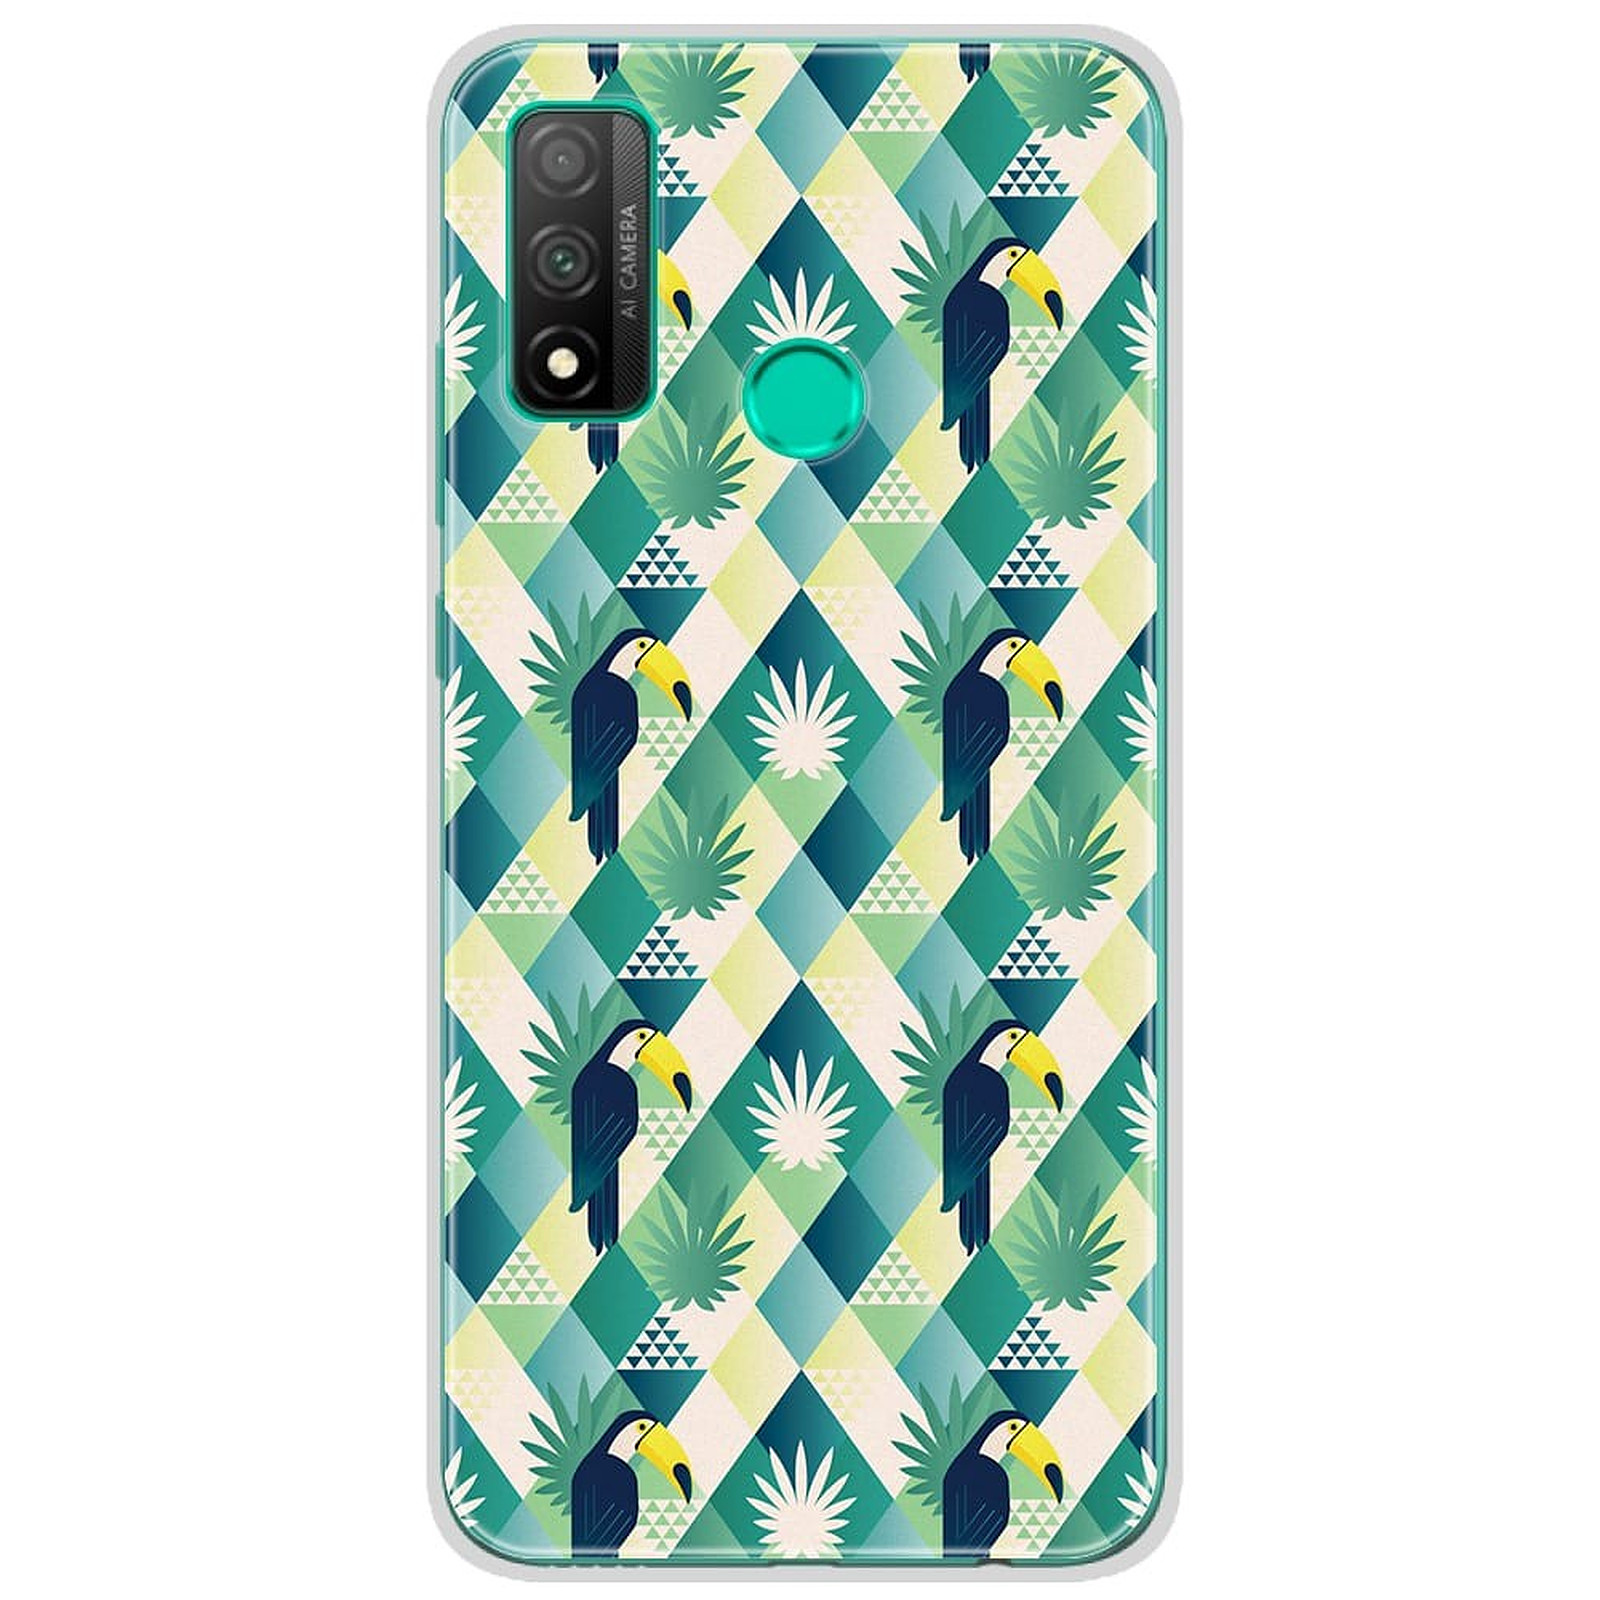 1001 Coques Coque silicone gel Huawei P Smart 2020 motif Toucan losange - Coque telephone 1001Coques